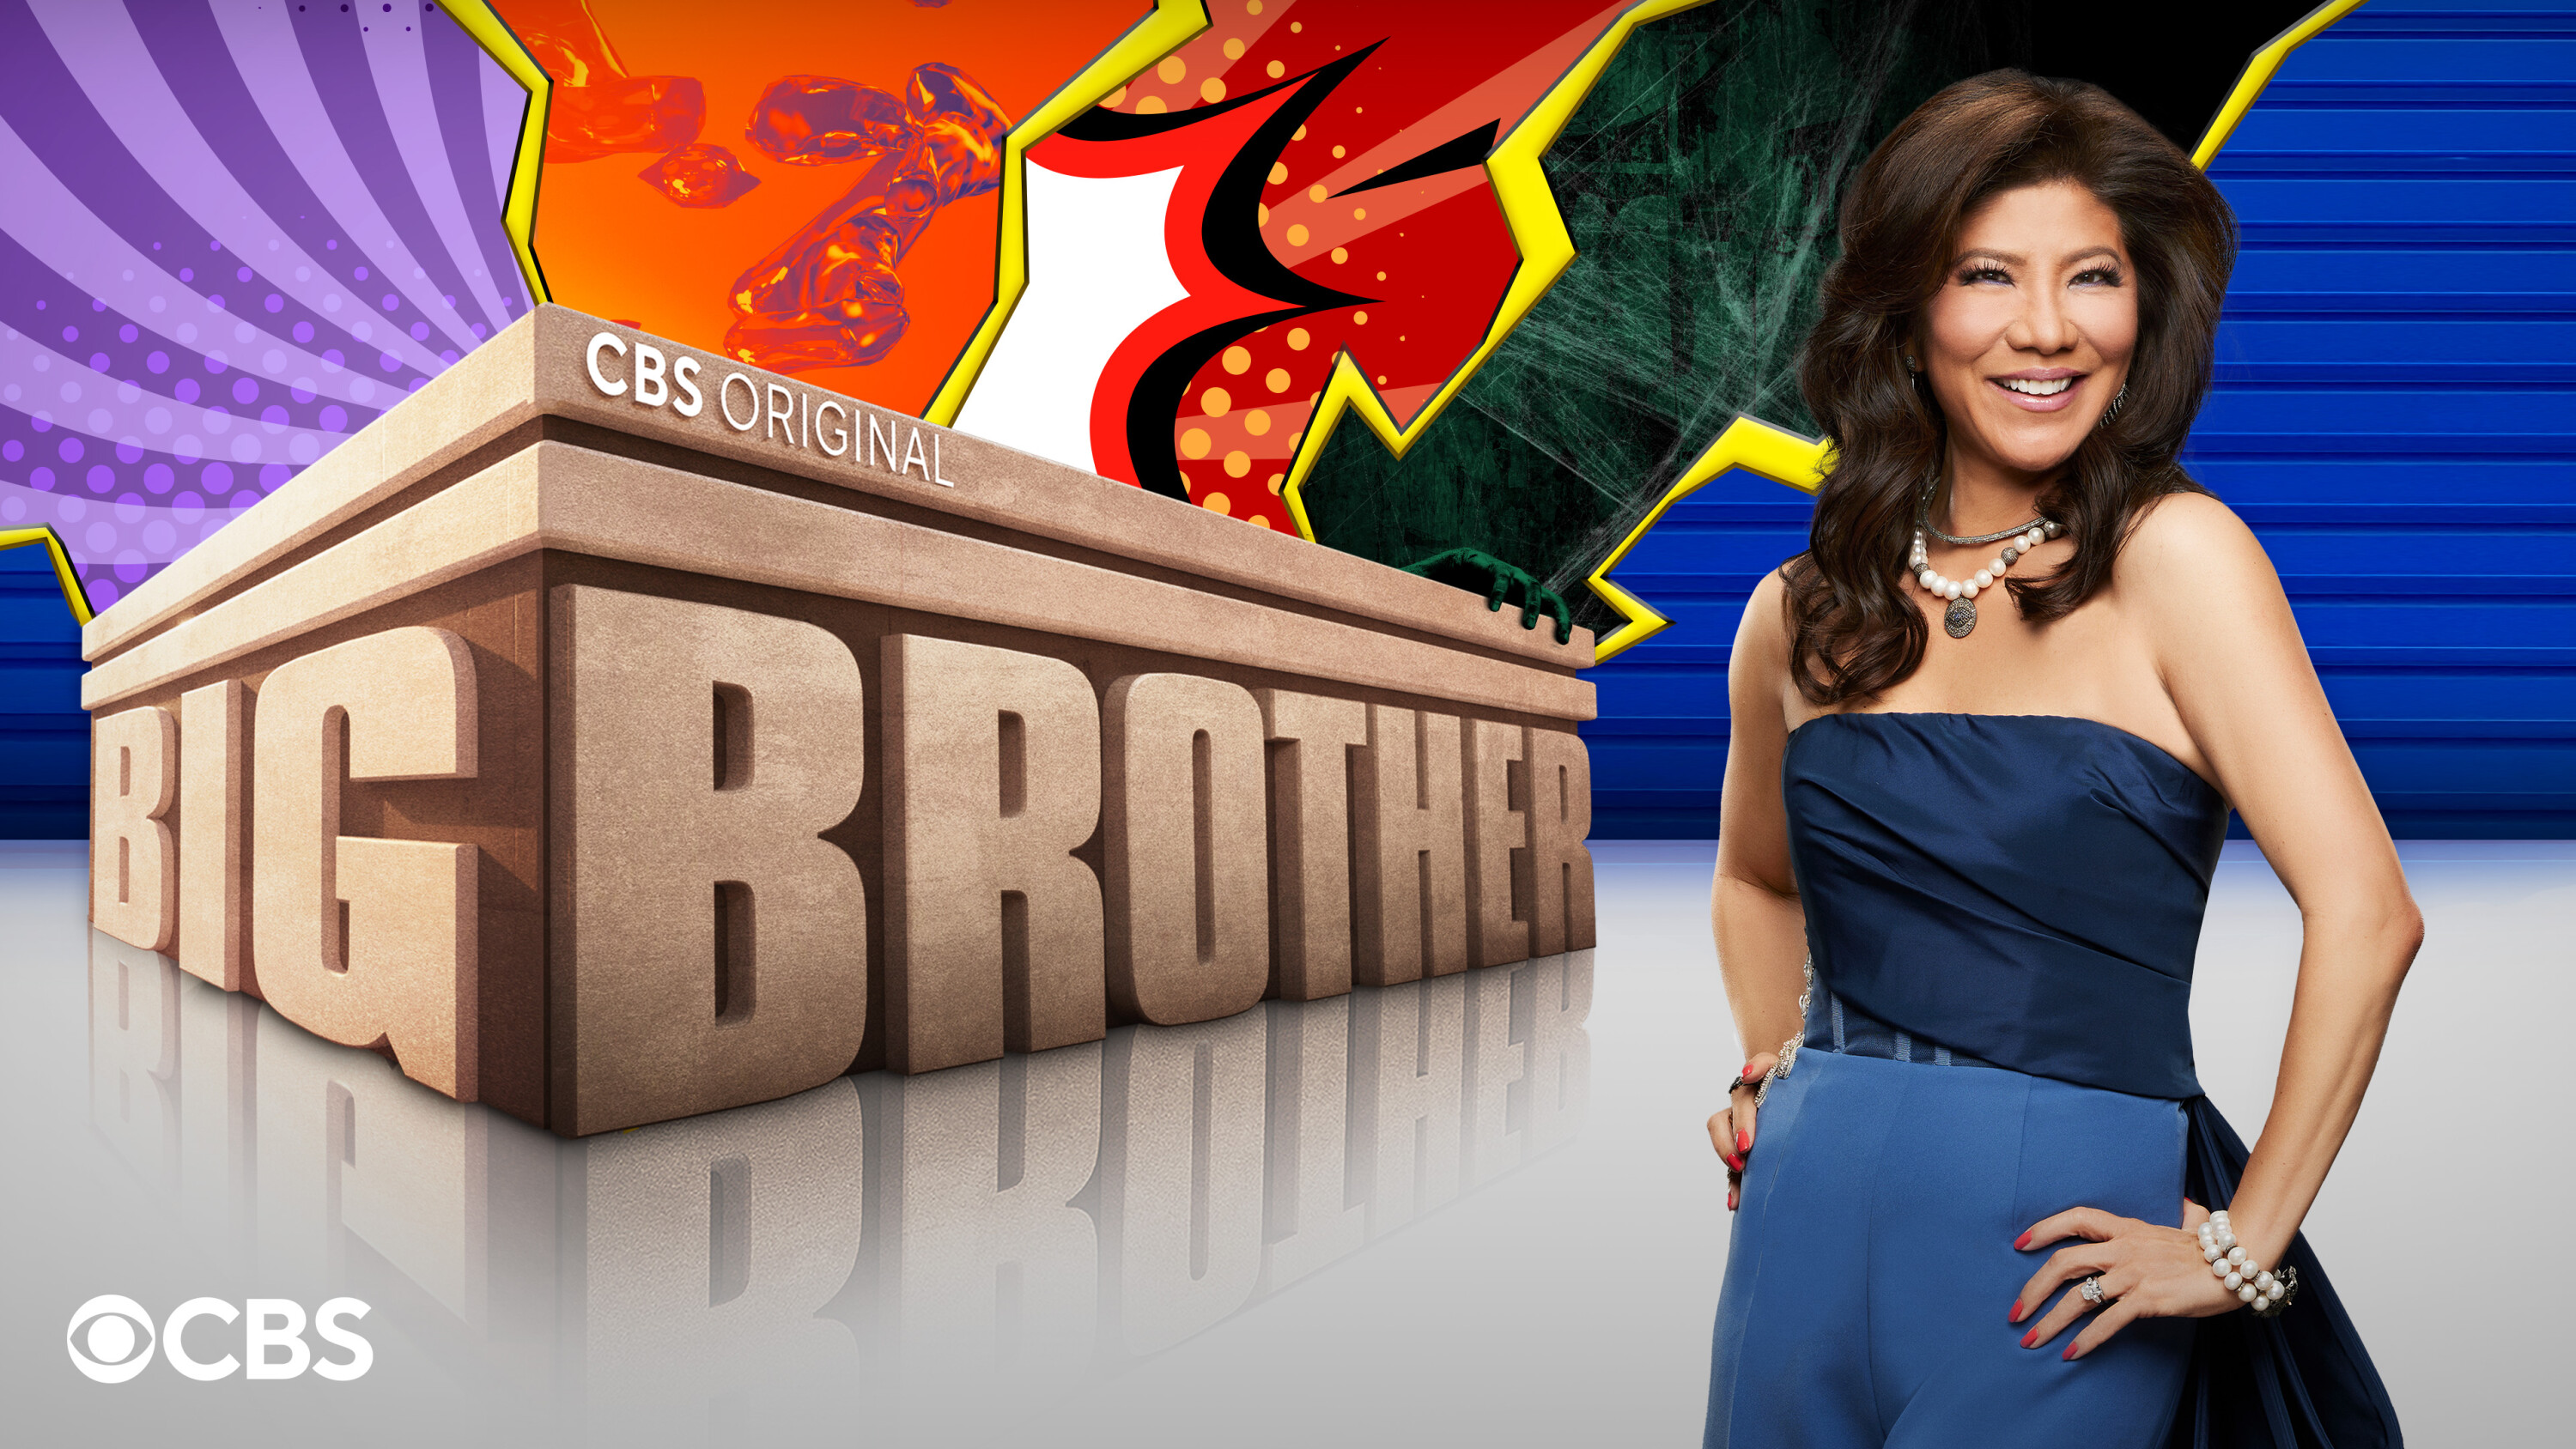 Big Brother pressure cooker competition How to watch online